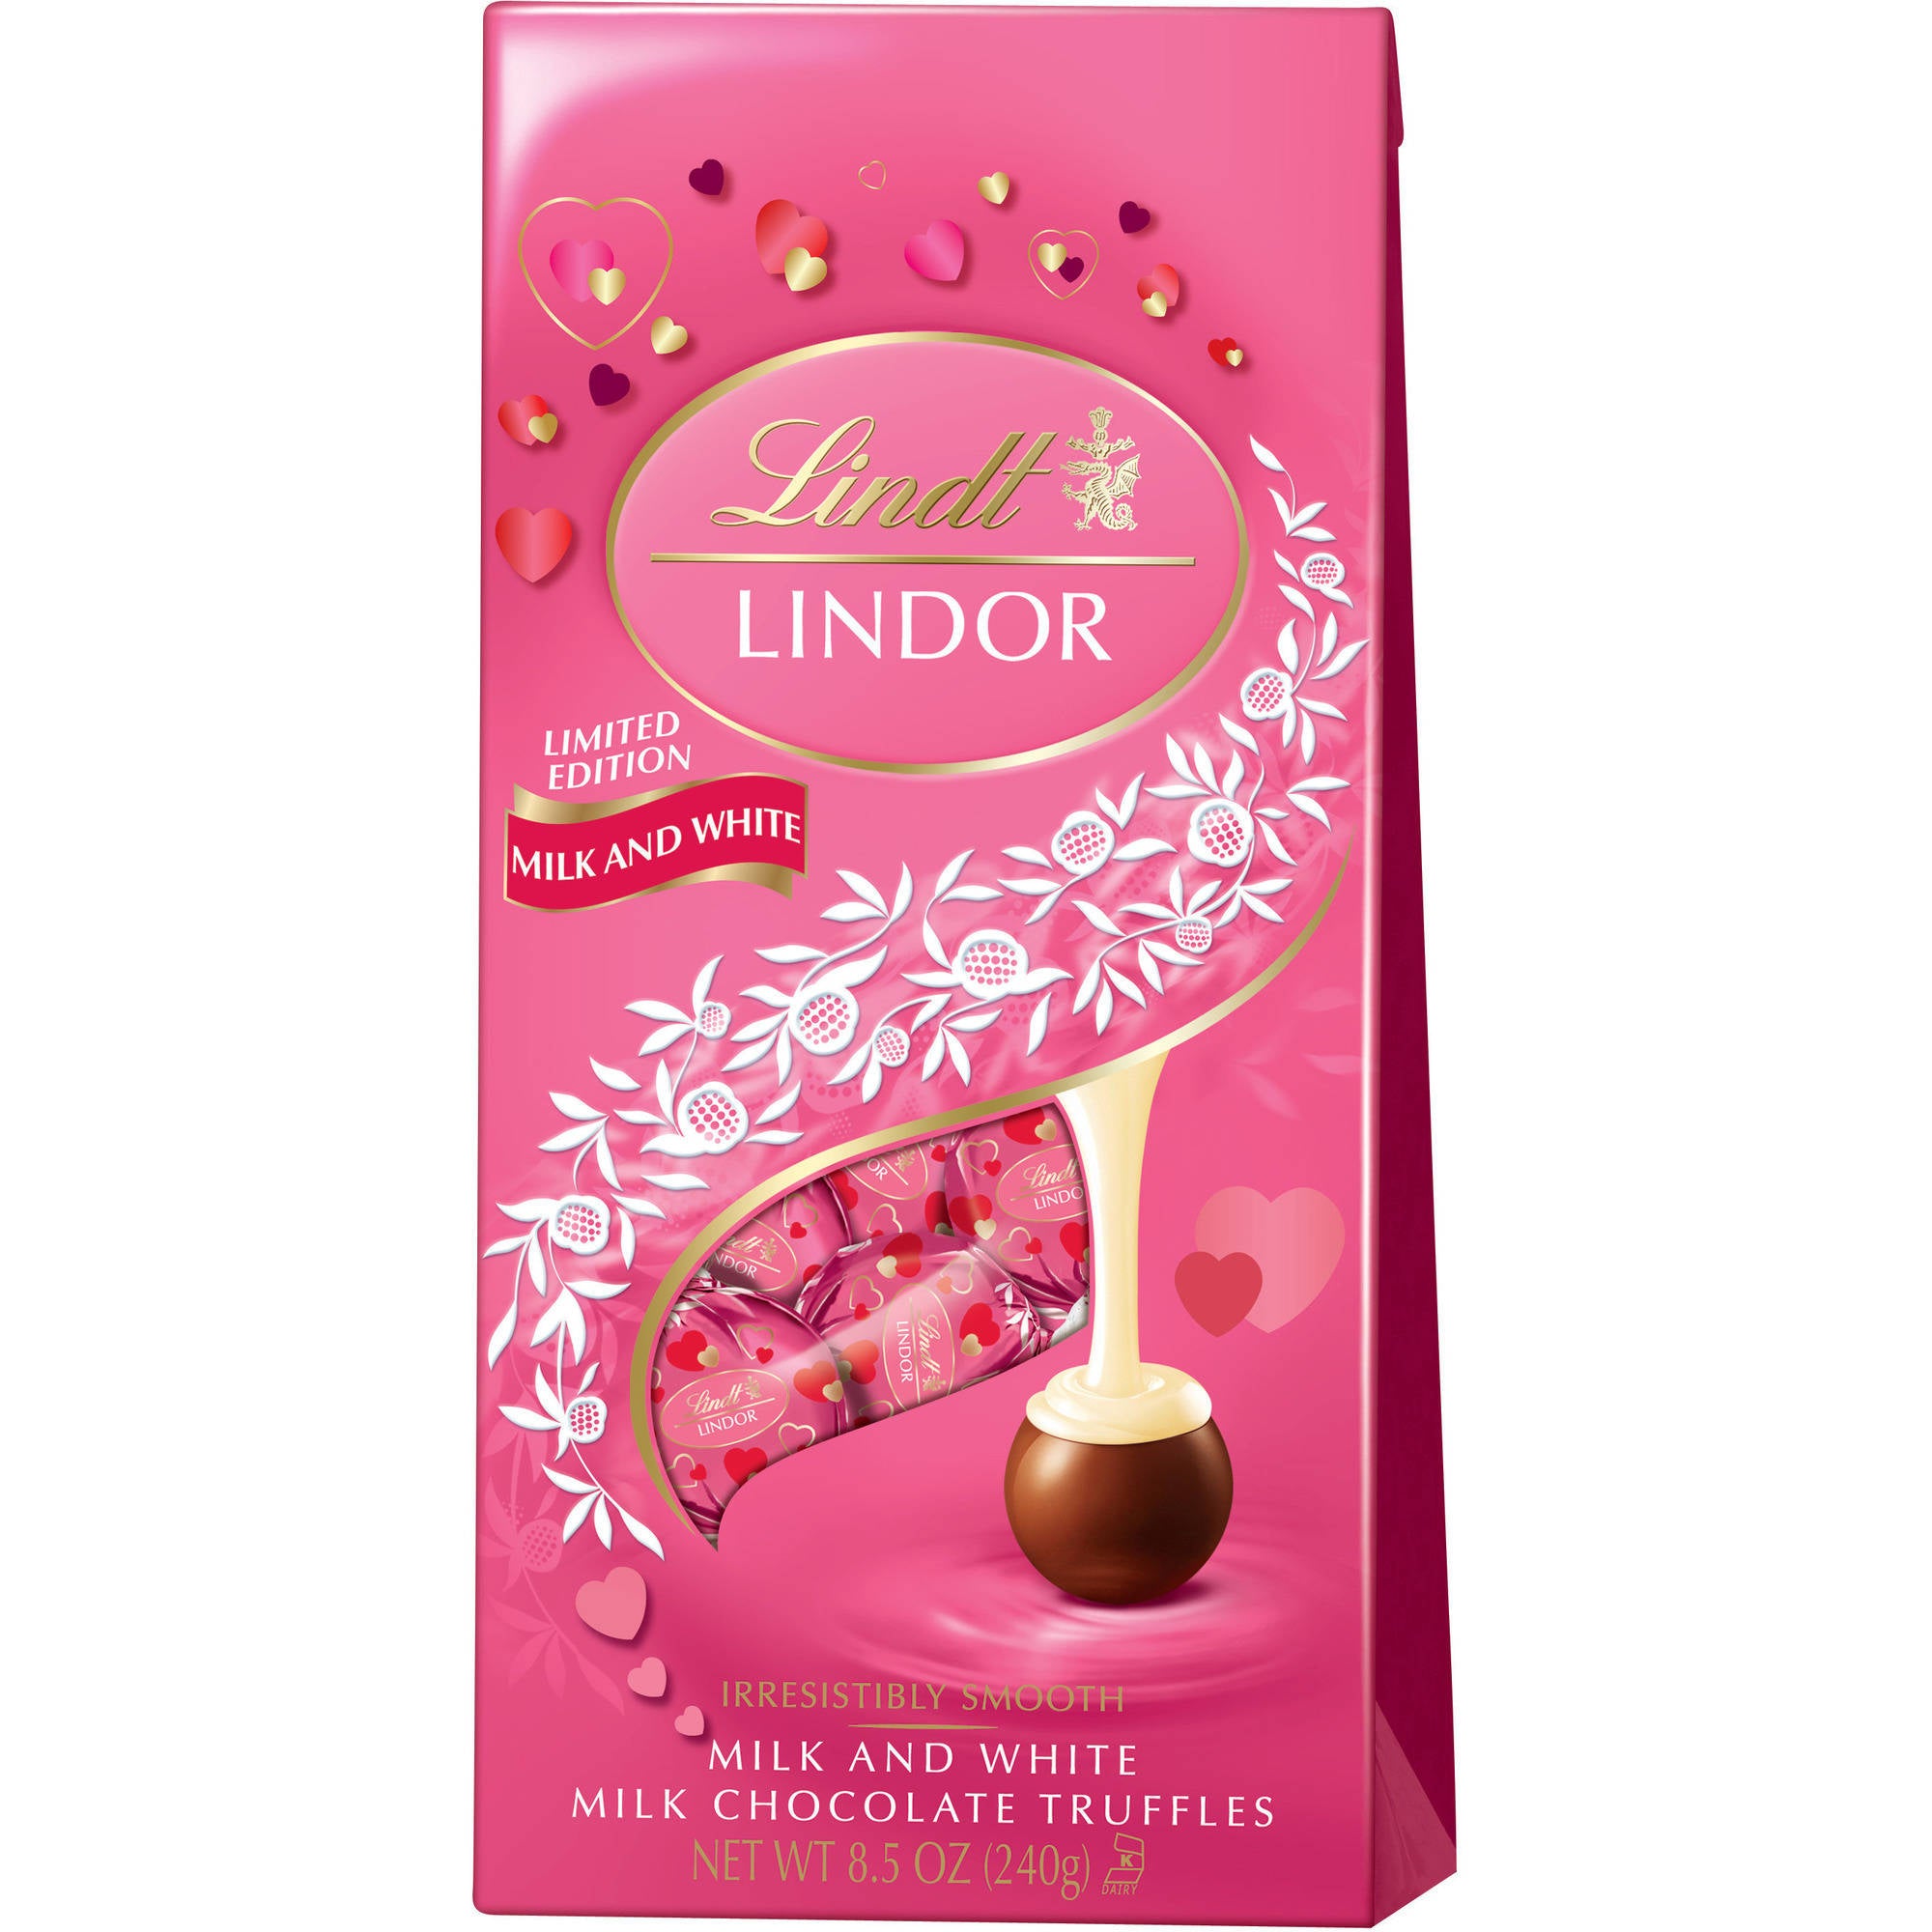 Lindt Lindor Milk and White Milk Chocolate Truffles Valentine's Limited Edition, 8.5 Oz